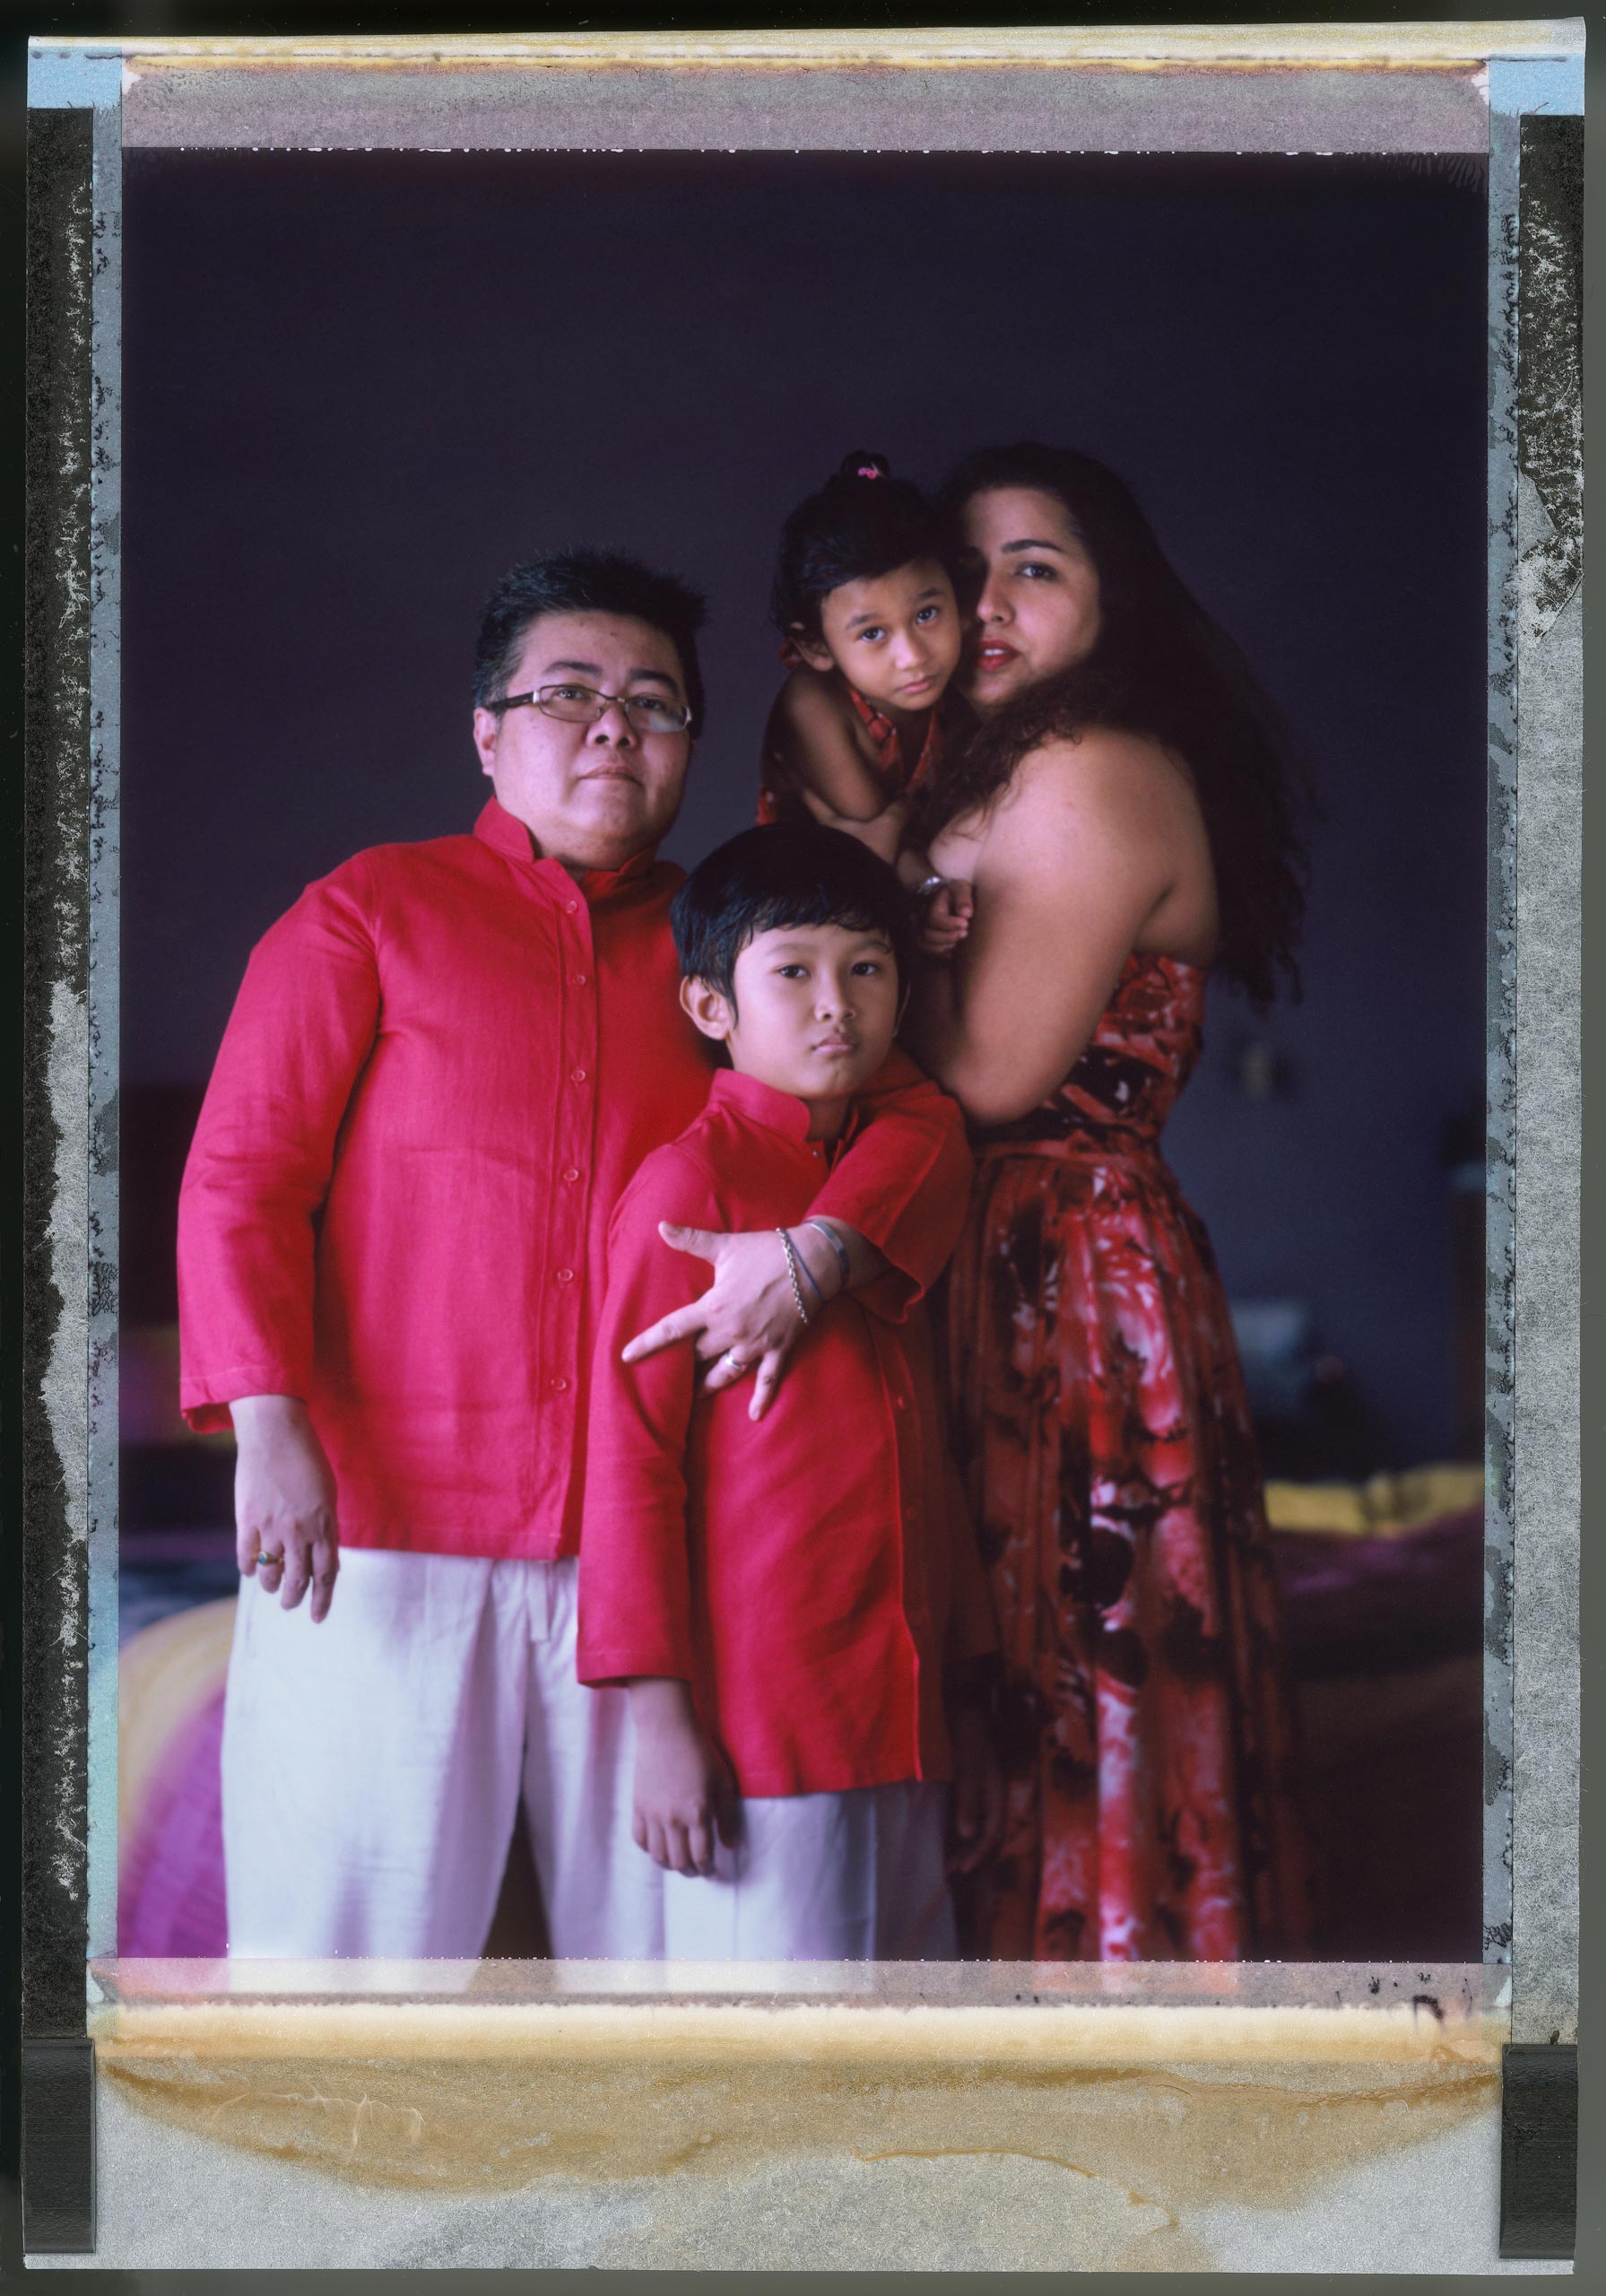 Mitch Yusmar
                              Kuala Lumpur, Malaysia, Jan. 2015
                              47-year-old transgender man Mitch Yusmar is photographed at home in Malaysia with his partner of 17 years, Lalita Abdullah, and their adopted children Izzy and Daniya.
                              
                              The Malaysian government retains a penal code criminalizing sodomy that dates back to the colonial era. It can include a 20-year-prison sentence and even corporal punishment. Yusmar’s relationship with his partner is not legally recognized and they live in fear that their family could be torn apart if something happened to Abdullah, who is the only legally recognized parent.
                              
                              “The core of our being is our family,” he says. “It can become very frustrating that we need to work doubly hard to ensure that our basic rights are looked after. But we have hope that some day things will be better.”